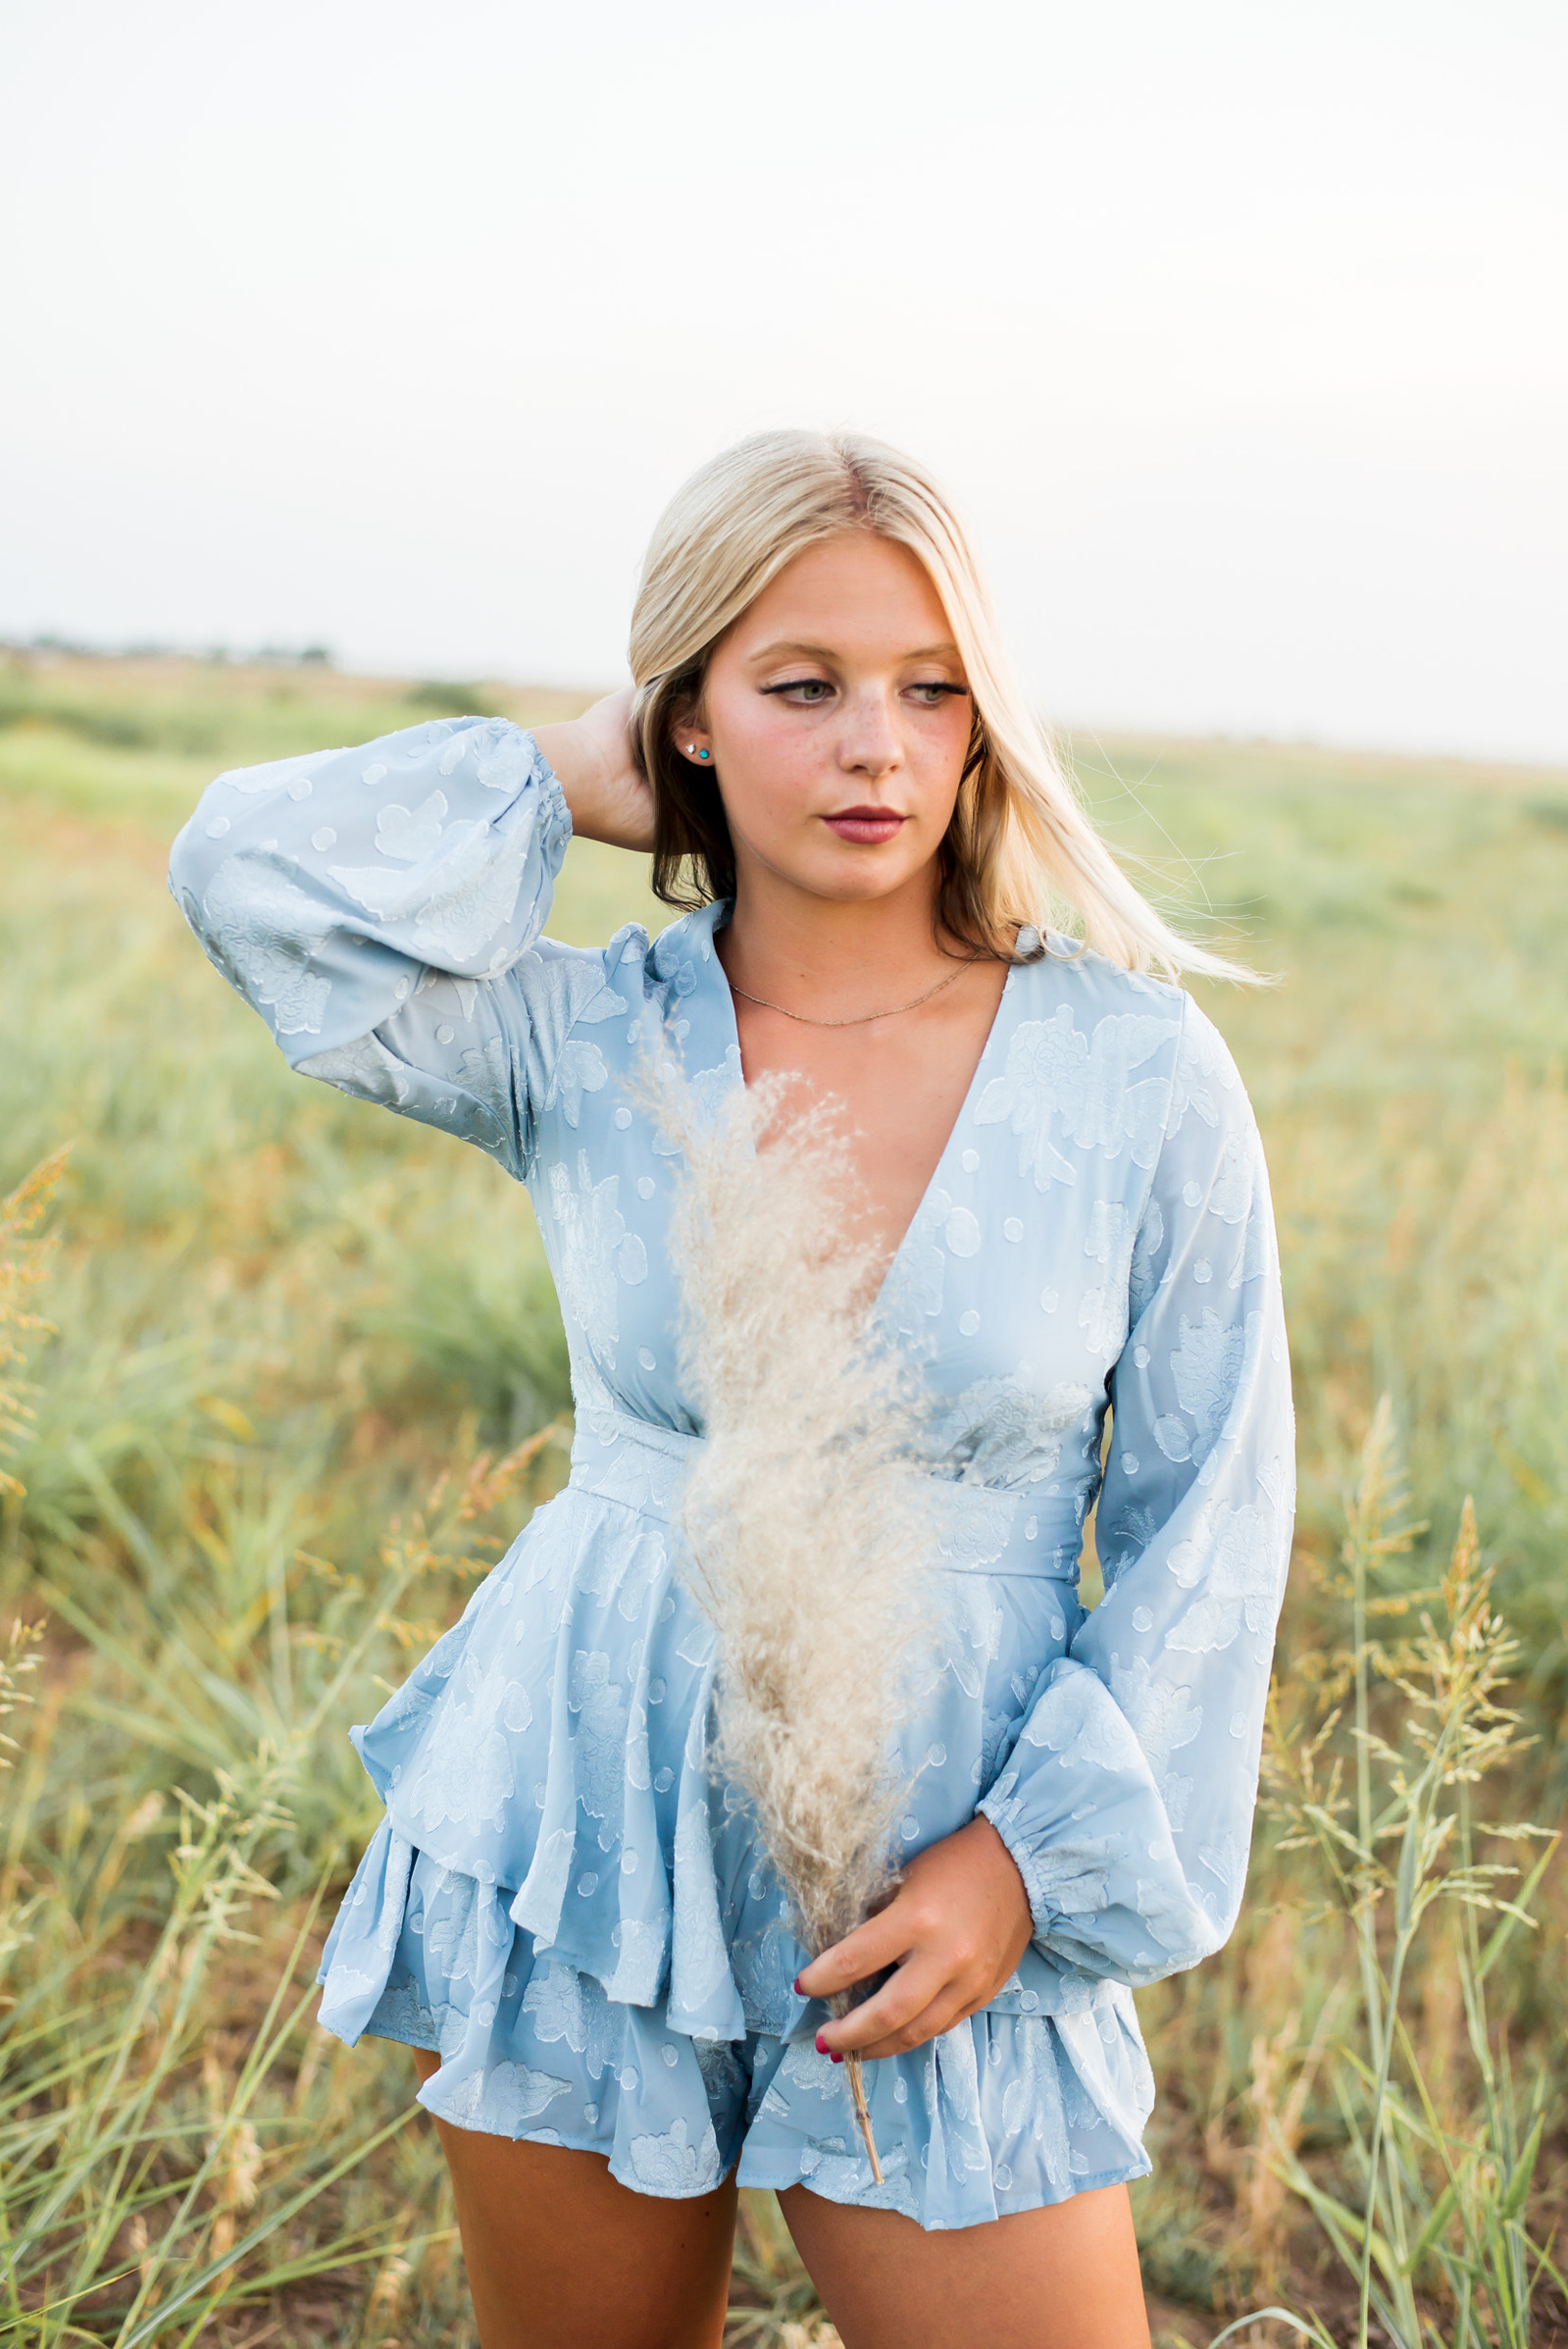 senior girl wearing a blue romper holds a piece of pampa grass and looks to the side with blonde hair blowing standing in a field taken by Oklahoma City senior photographer